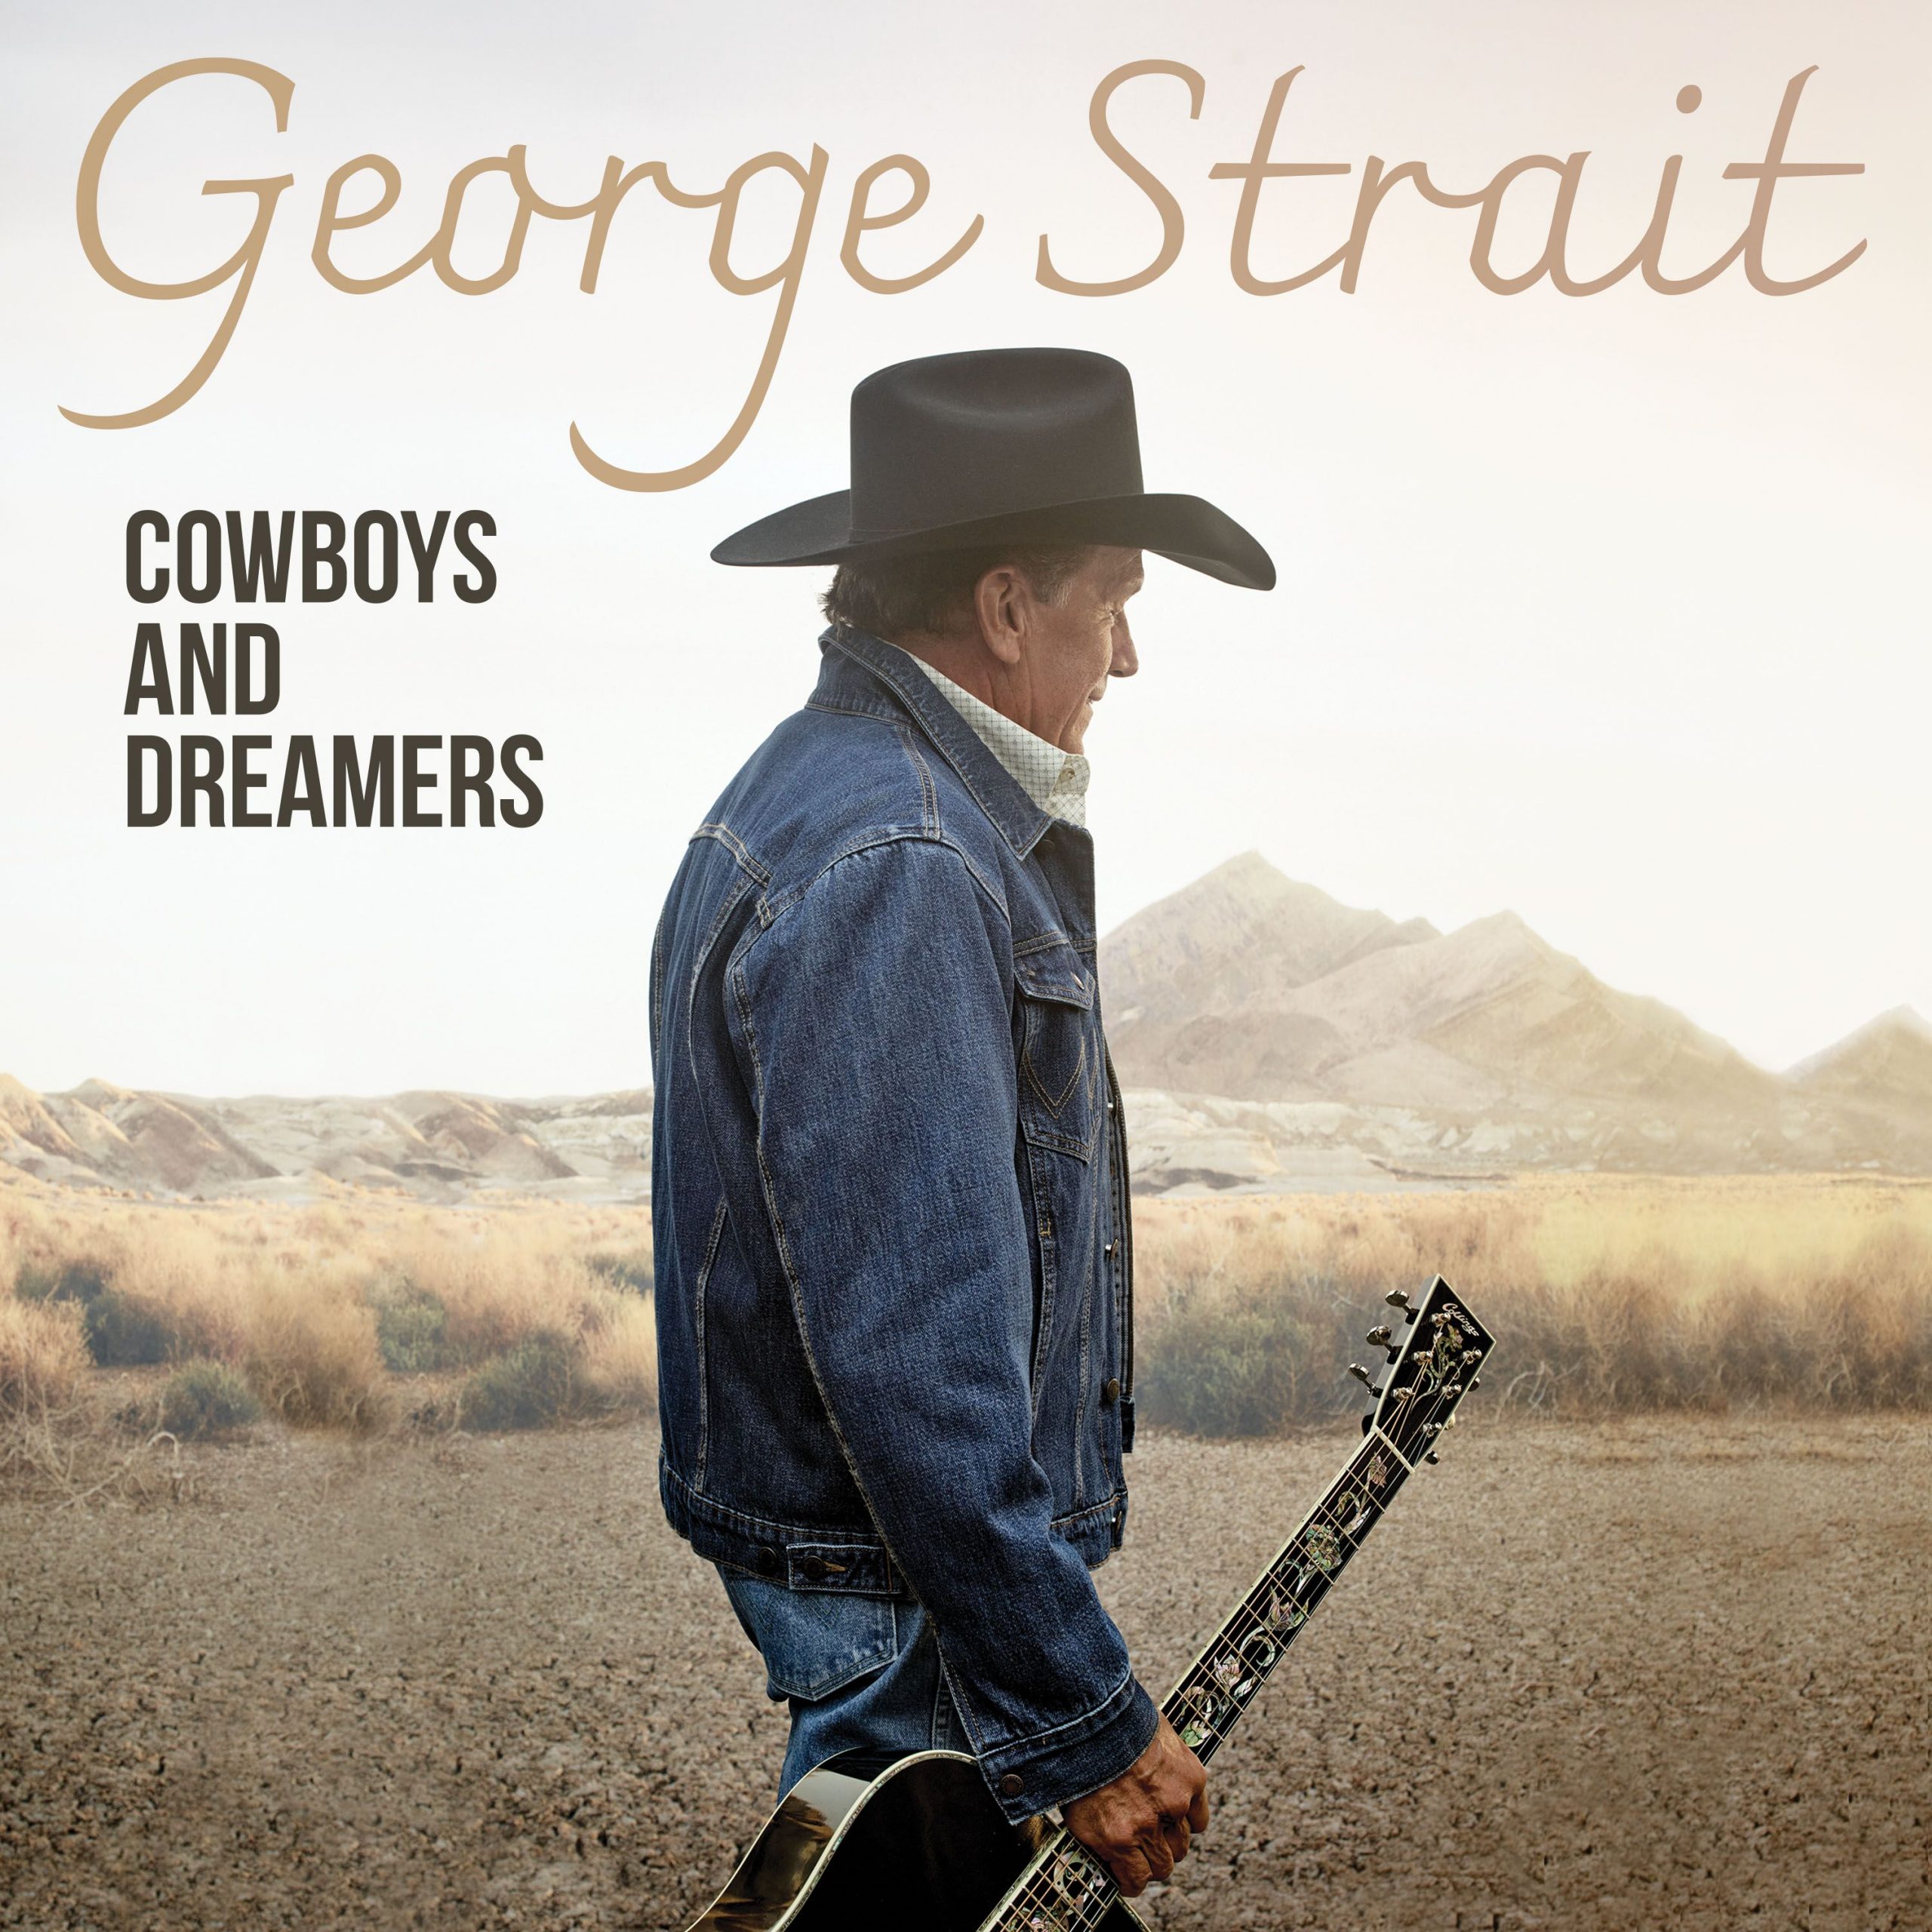 GEORGE STRAIT RELEASES NEW SONG “MIA DOWN IN MIA” FROM HIGHLY ANTICIPATED ‘COWBOYS AND DREAMERS’